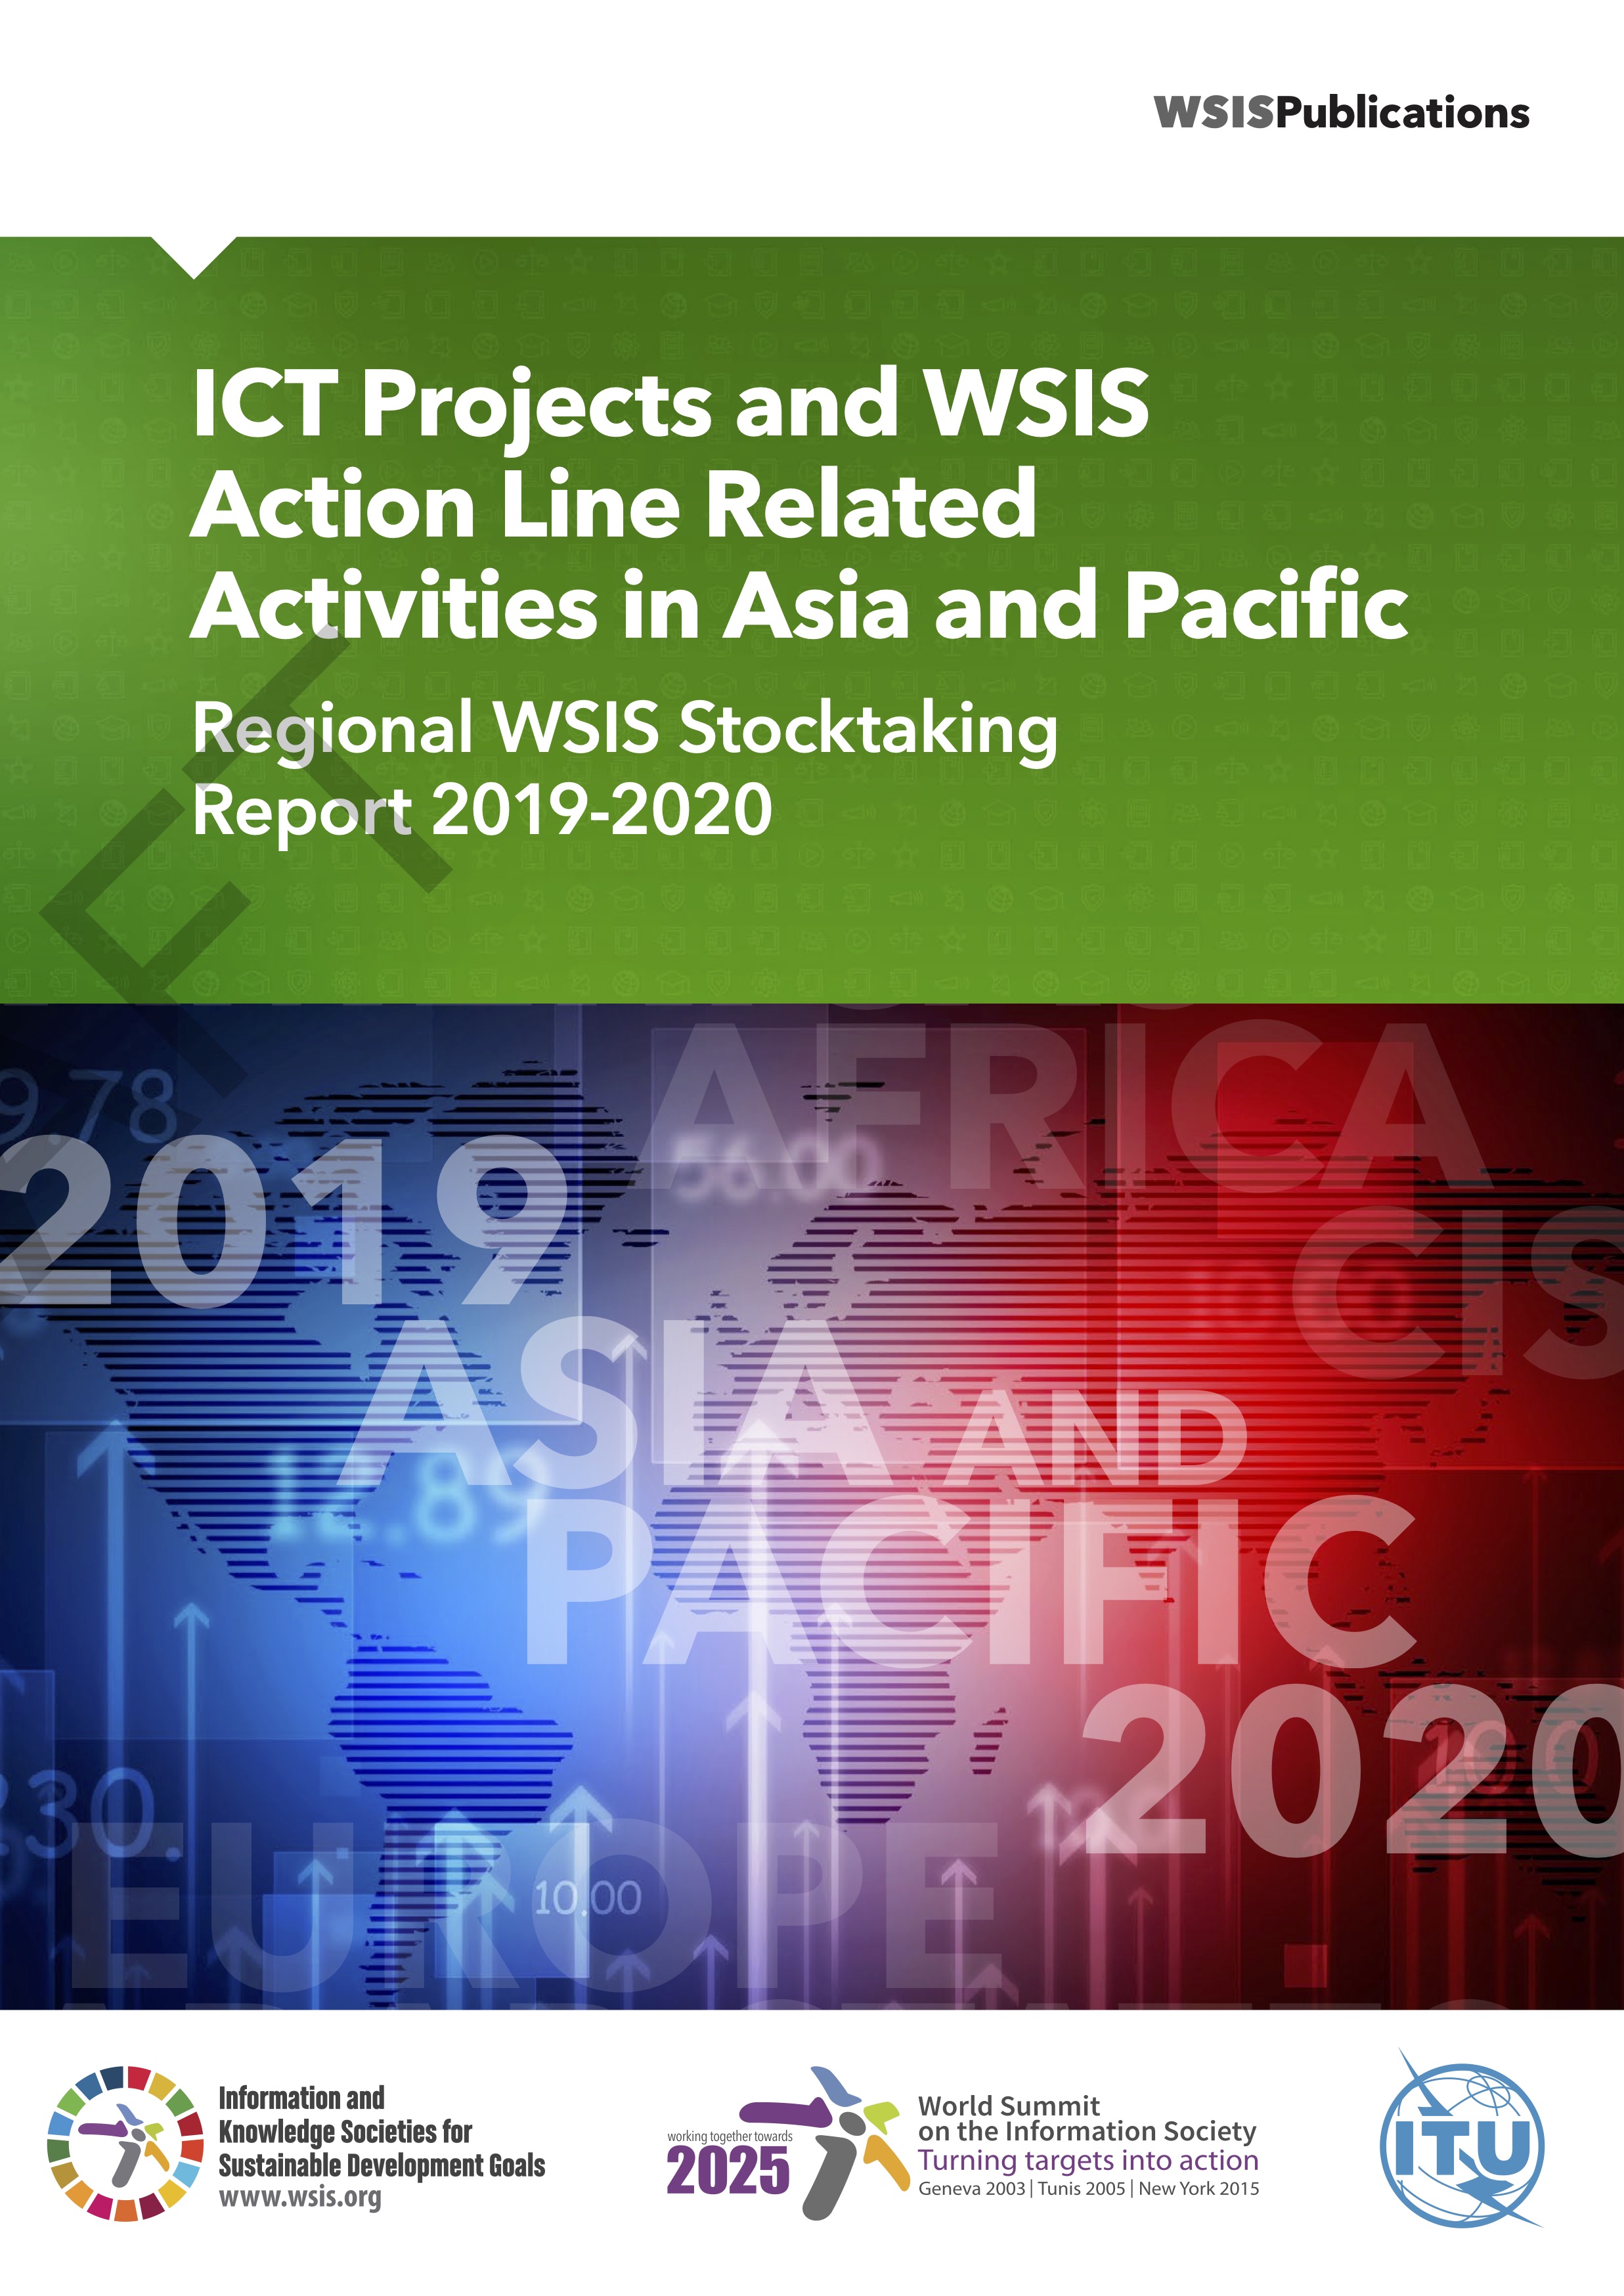 Regional WSIS Stocktaking Report 2019-2020 — Asia and Pacific